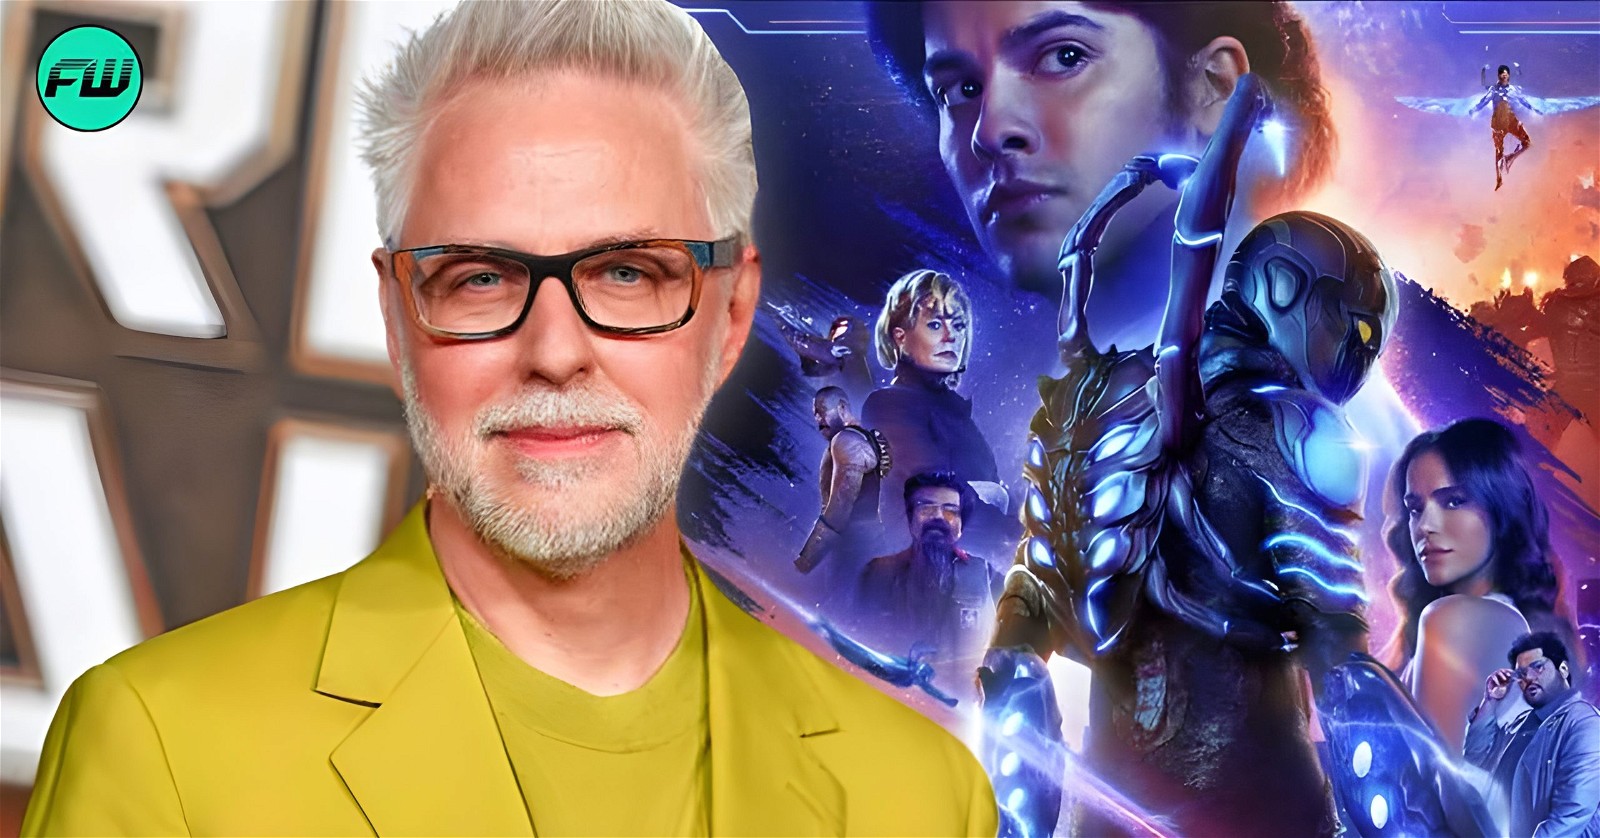 Blue Beetle Director Claims James Gunn’s Next DCU Film Will Pay Homage to Latin Cinema Despite Movie Tracking to Have Worst Ever Box-Office Collection